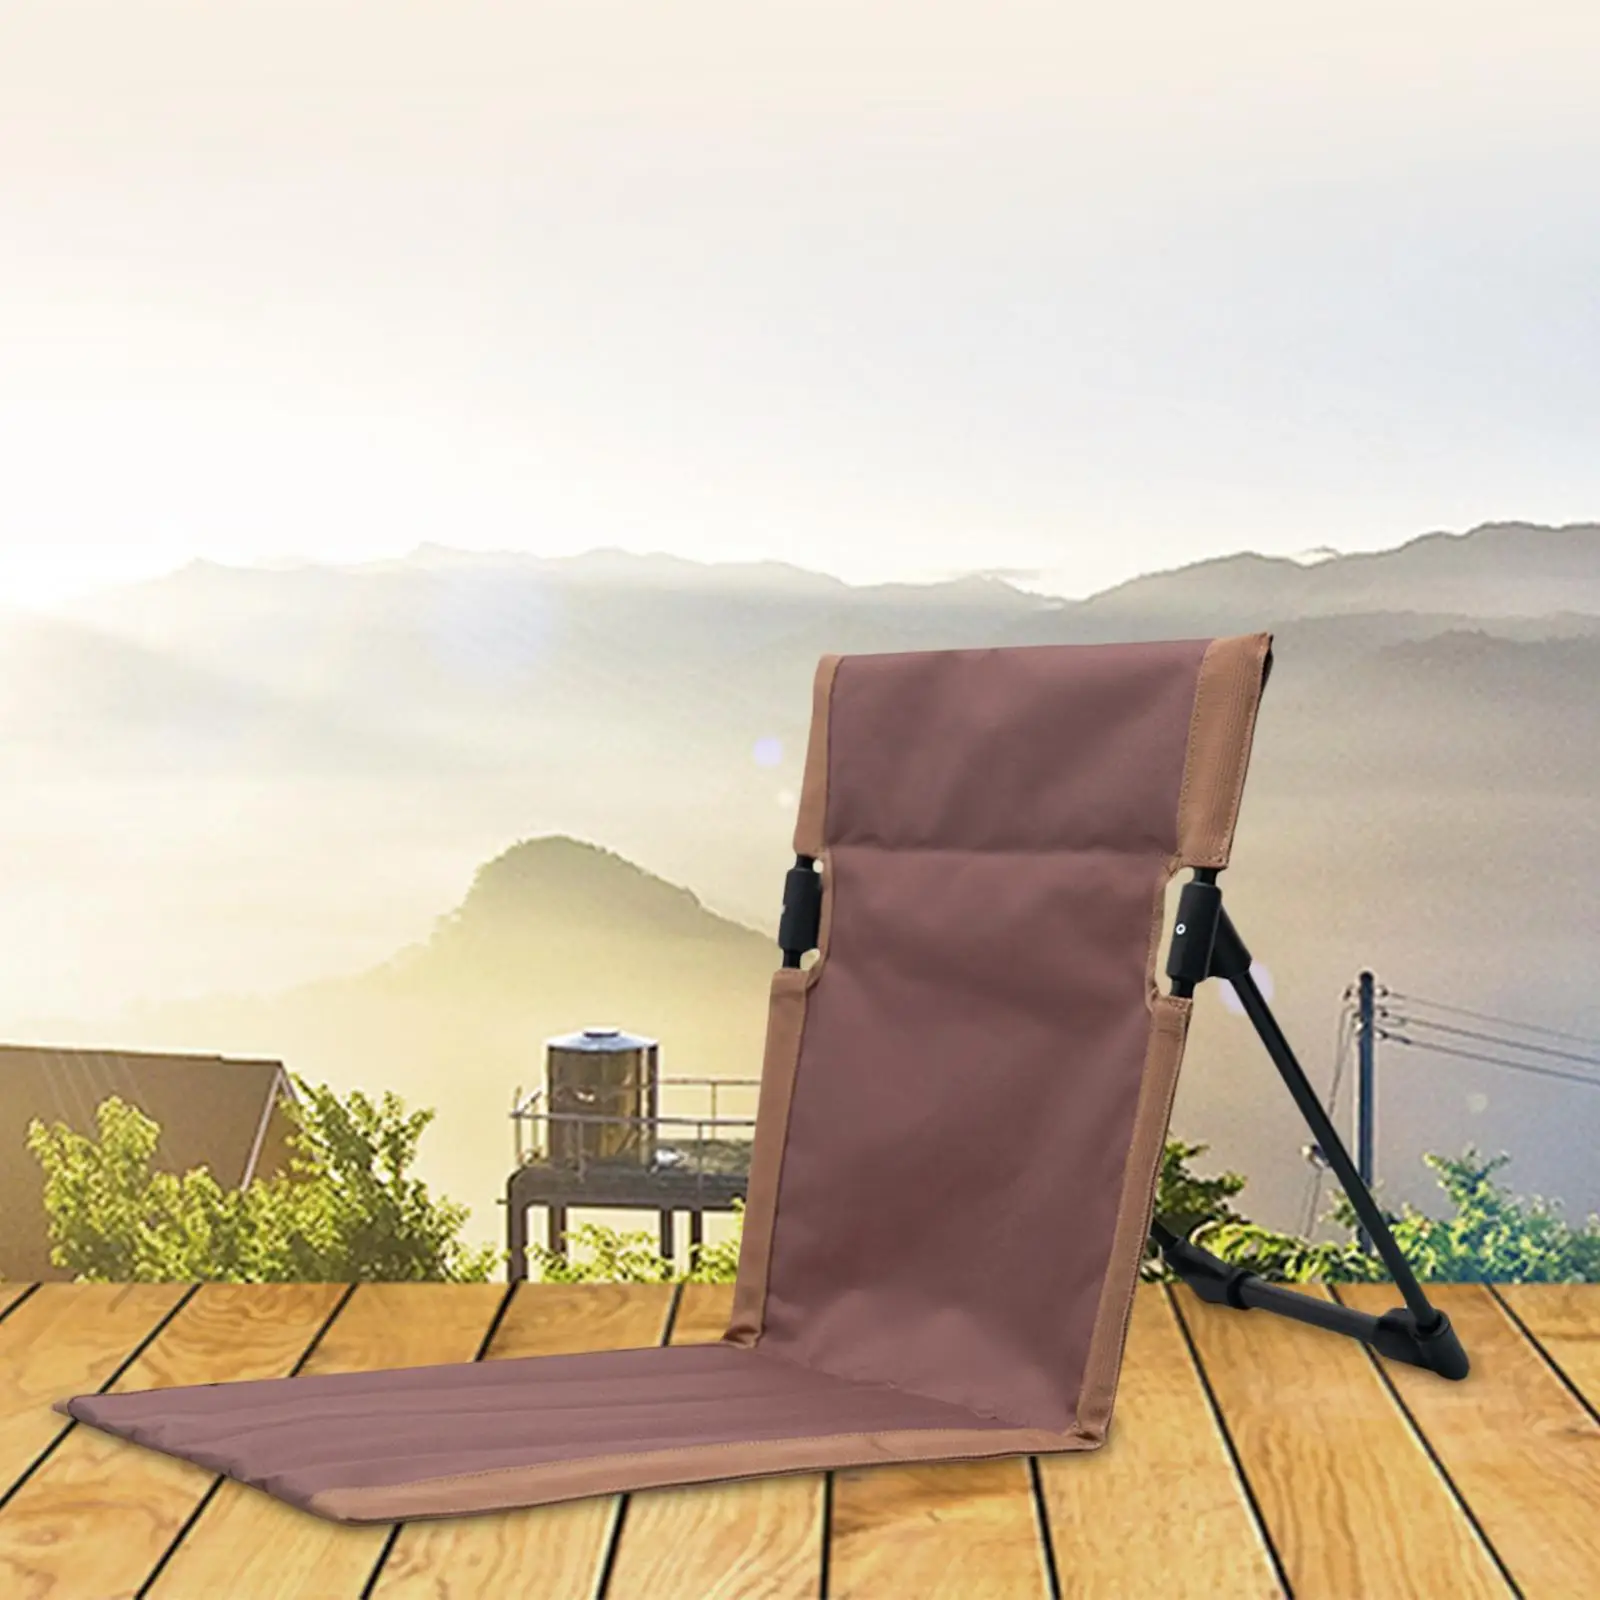 Backrest Pad Camping Mat Seat Cushion Foldable Back Support Oxford Stadium Chair for Park Music Concerts Travel Picnic Outdoor